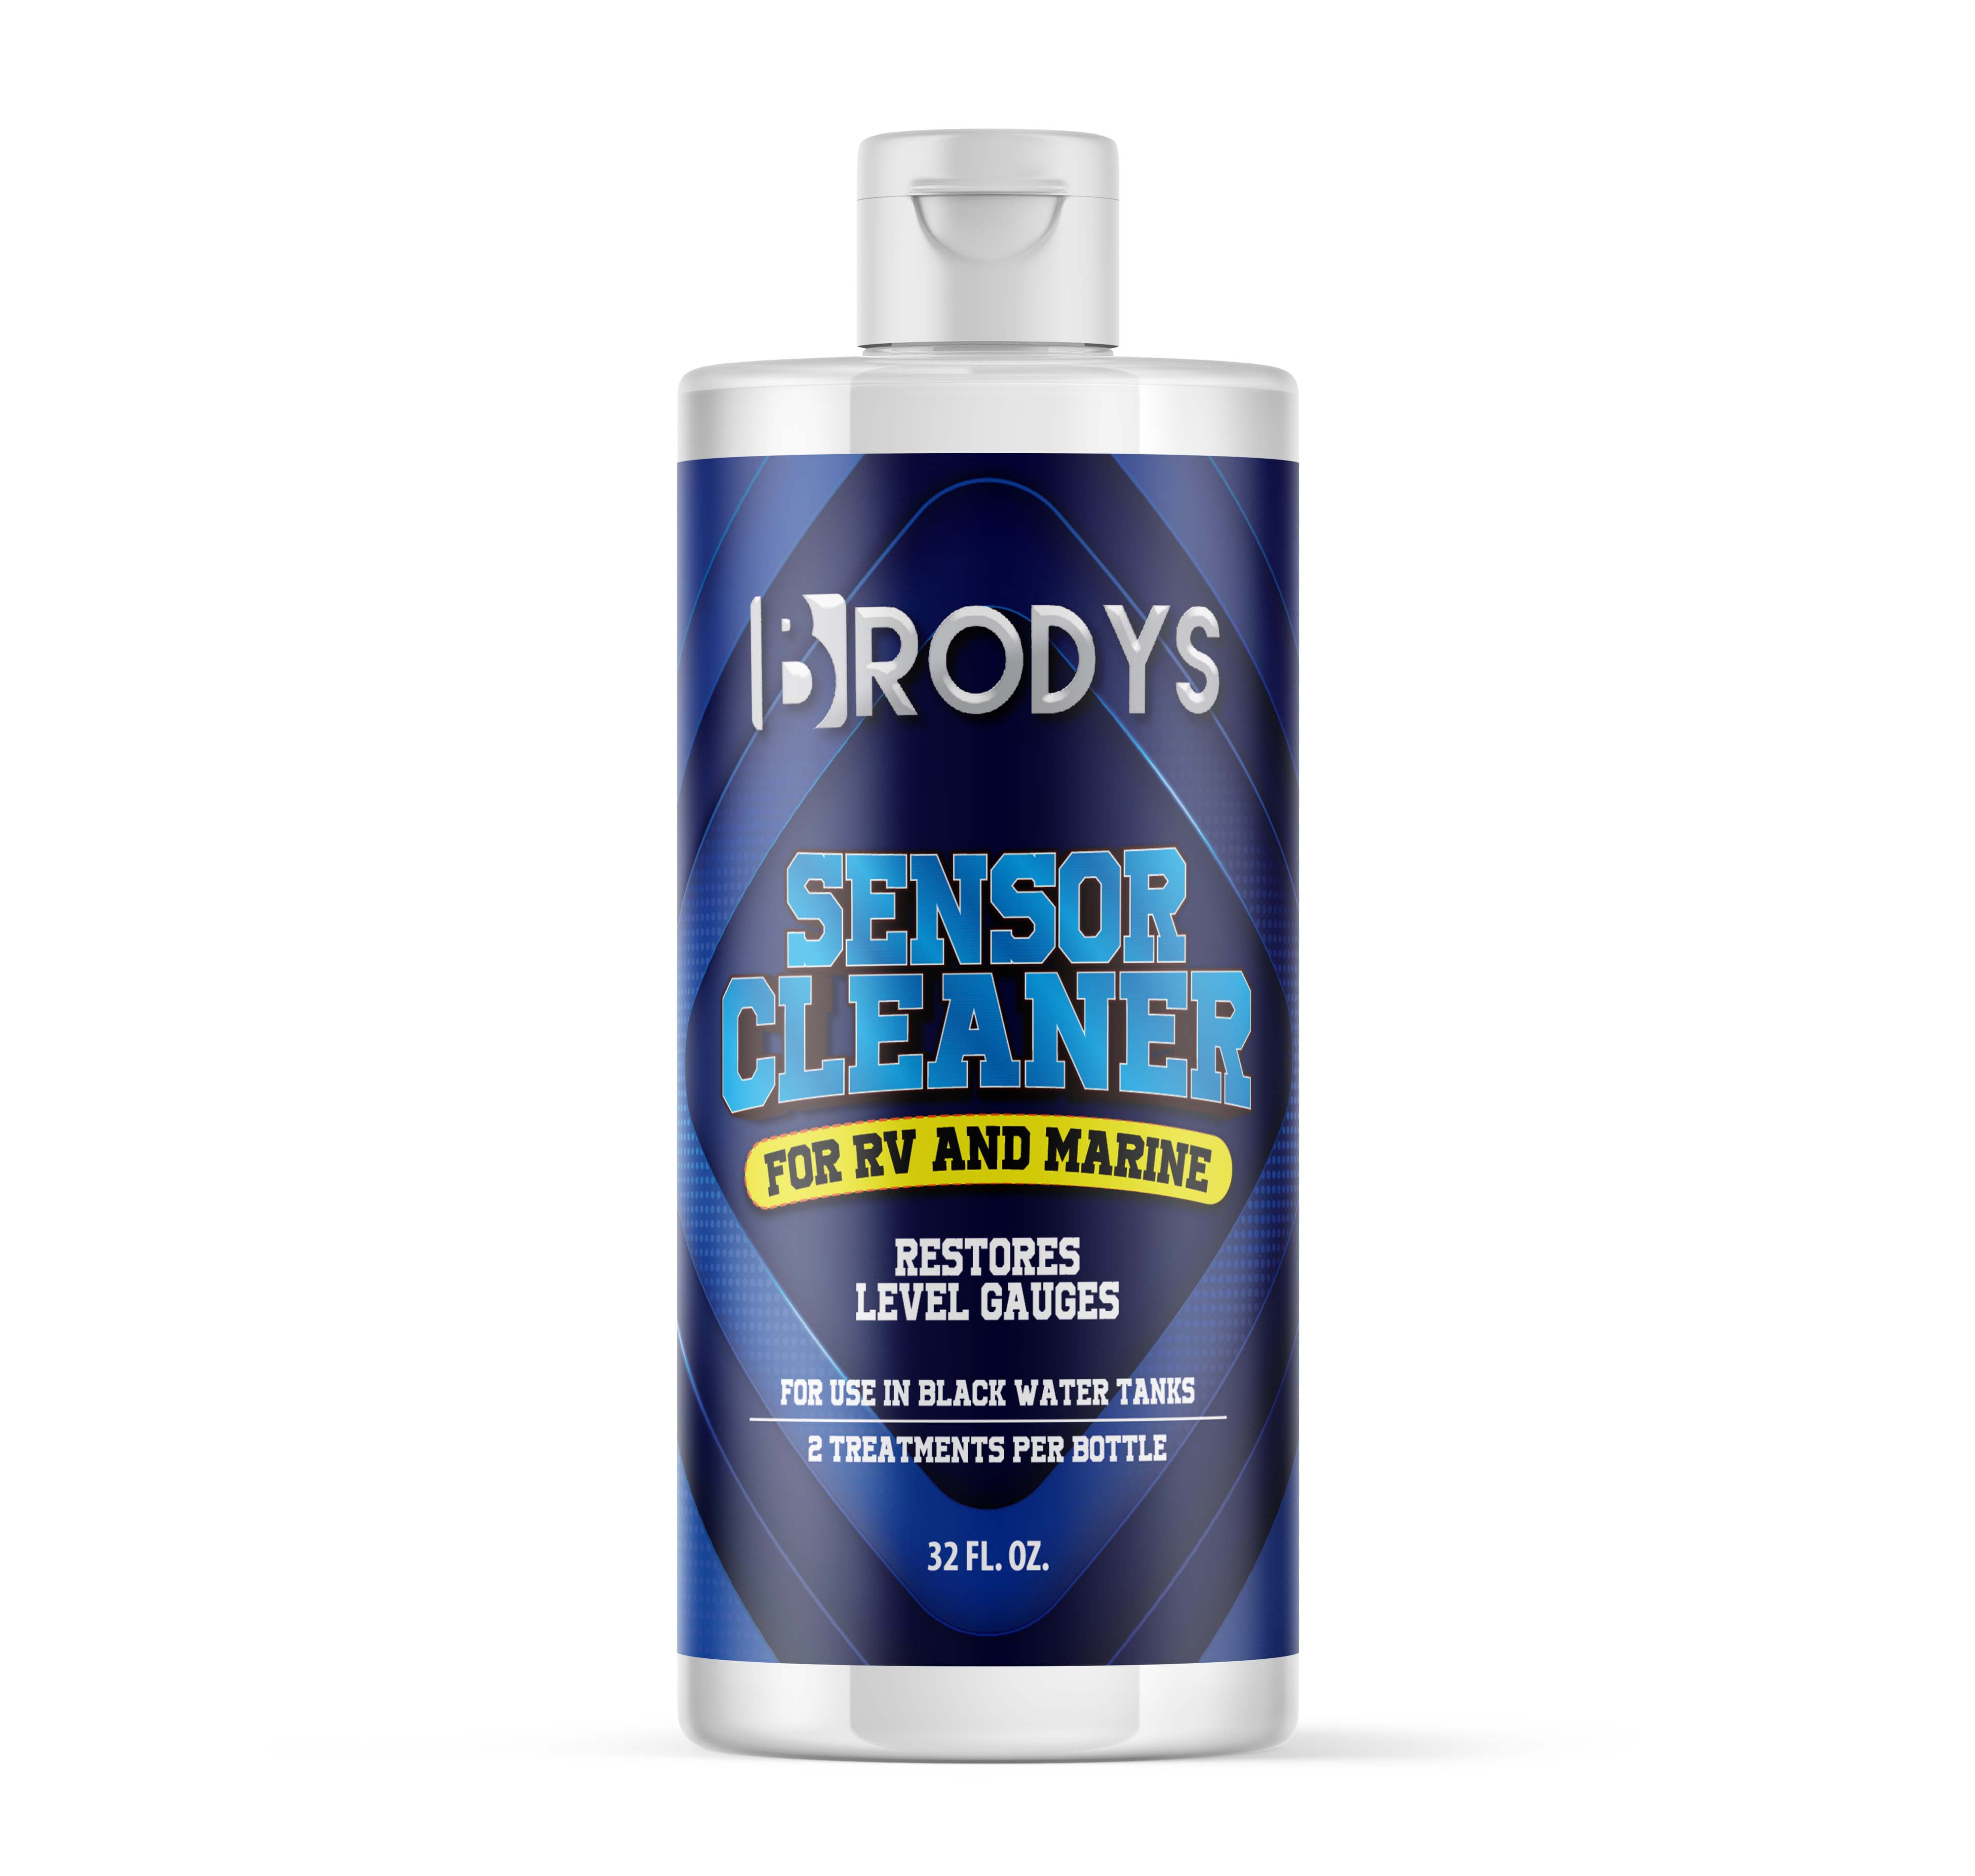 BRODYS - RV and Marine Sensor Cleaner Liquid for Black Water